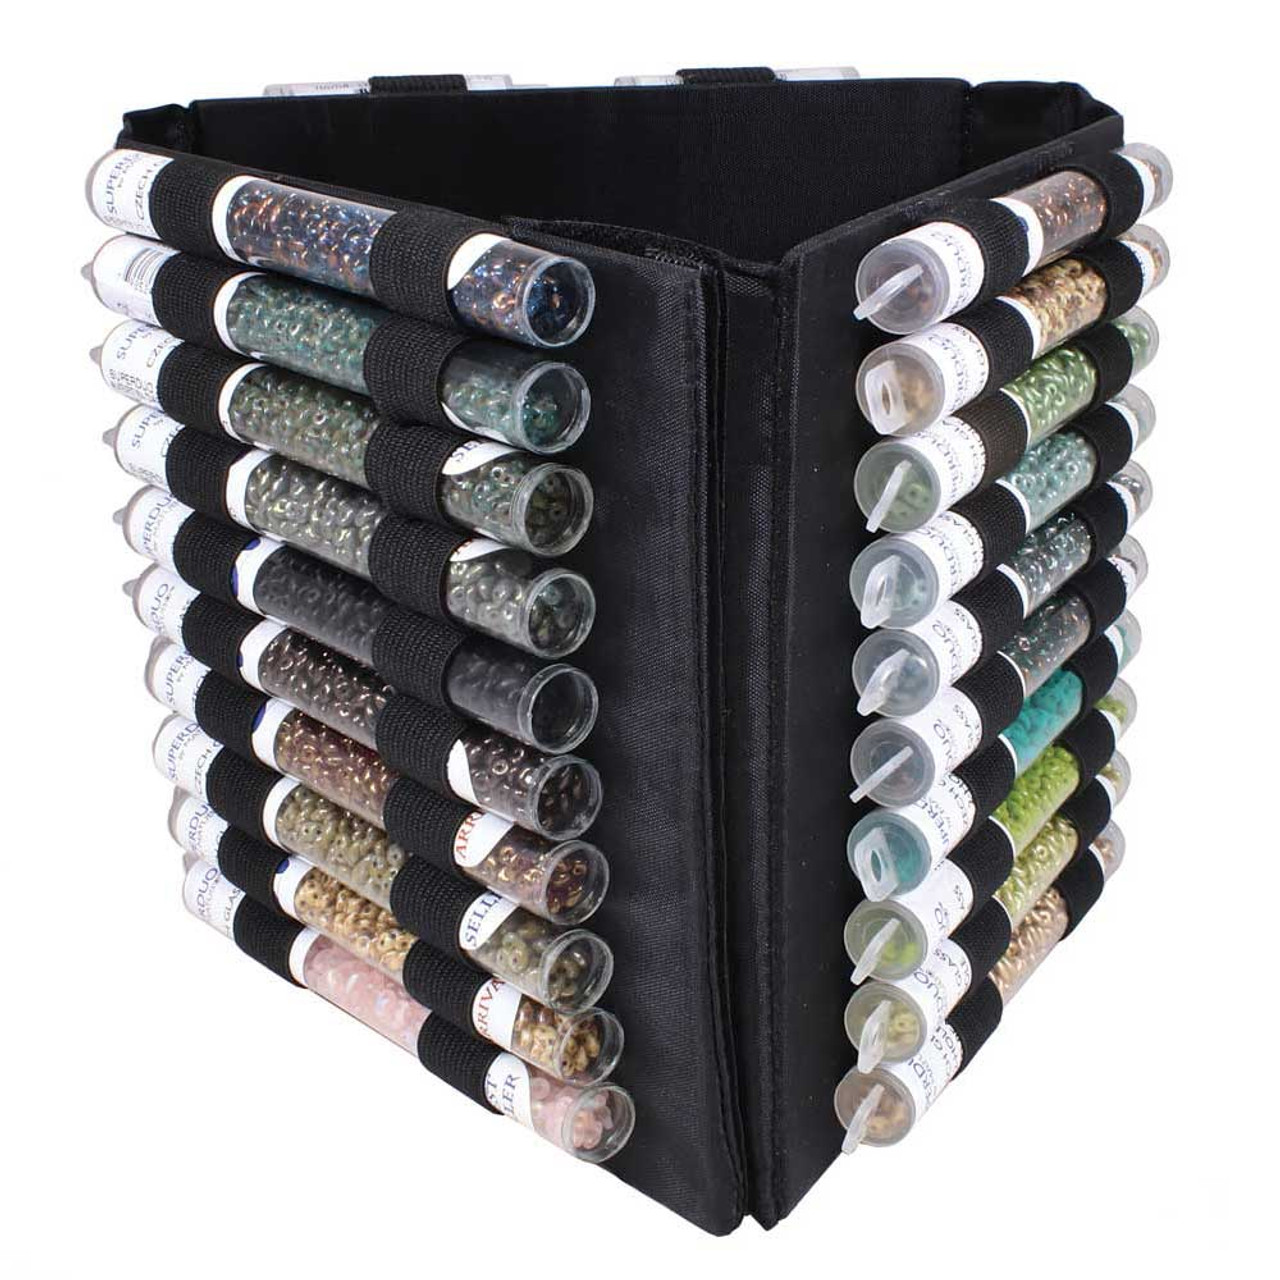 Mini Bead Tube Tower Portable Storage for Beading Supplies CLEARANCE